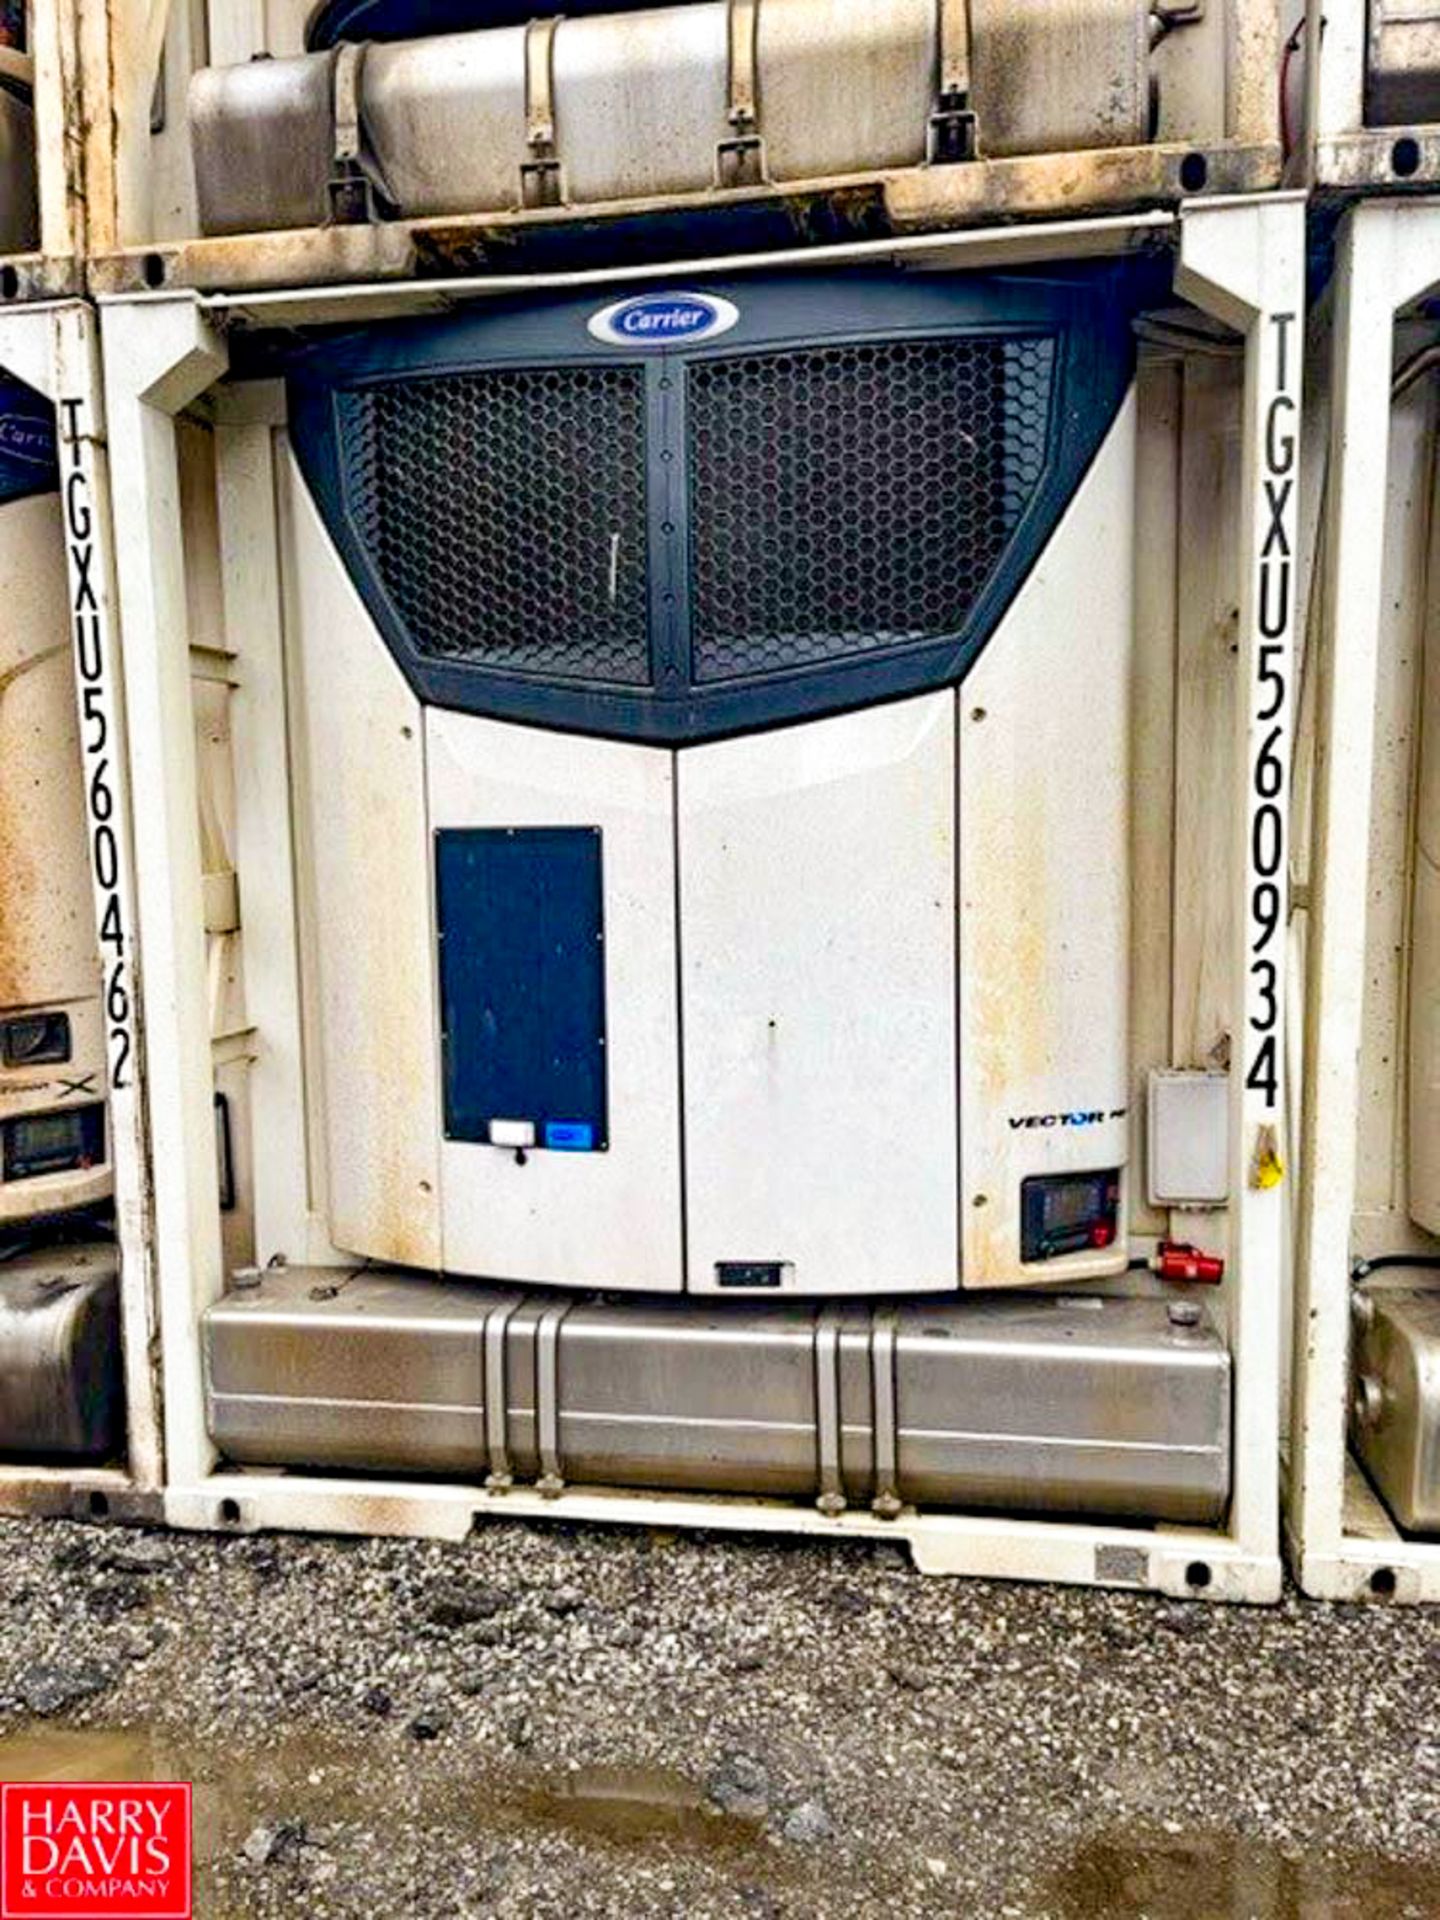 2021 Insulated, 53' CIMC Container with Carrier Vector HE19 Refrigeration Unit, Approximately 1,121 - Image 2 of 11